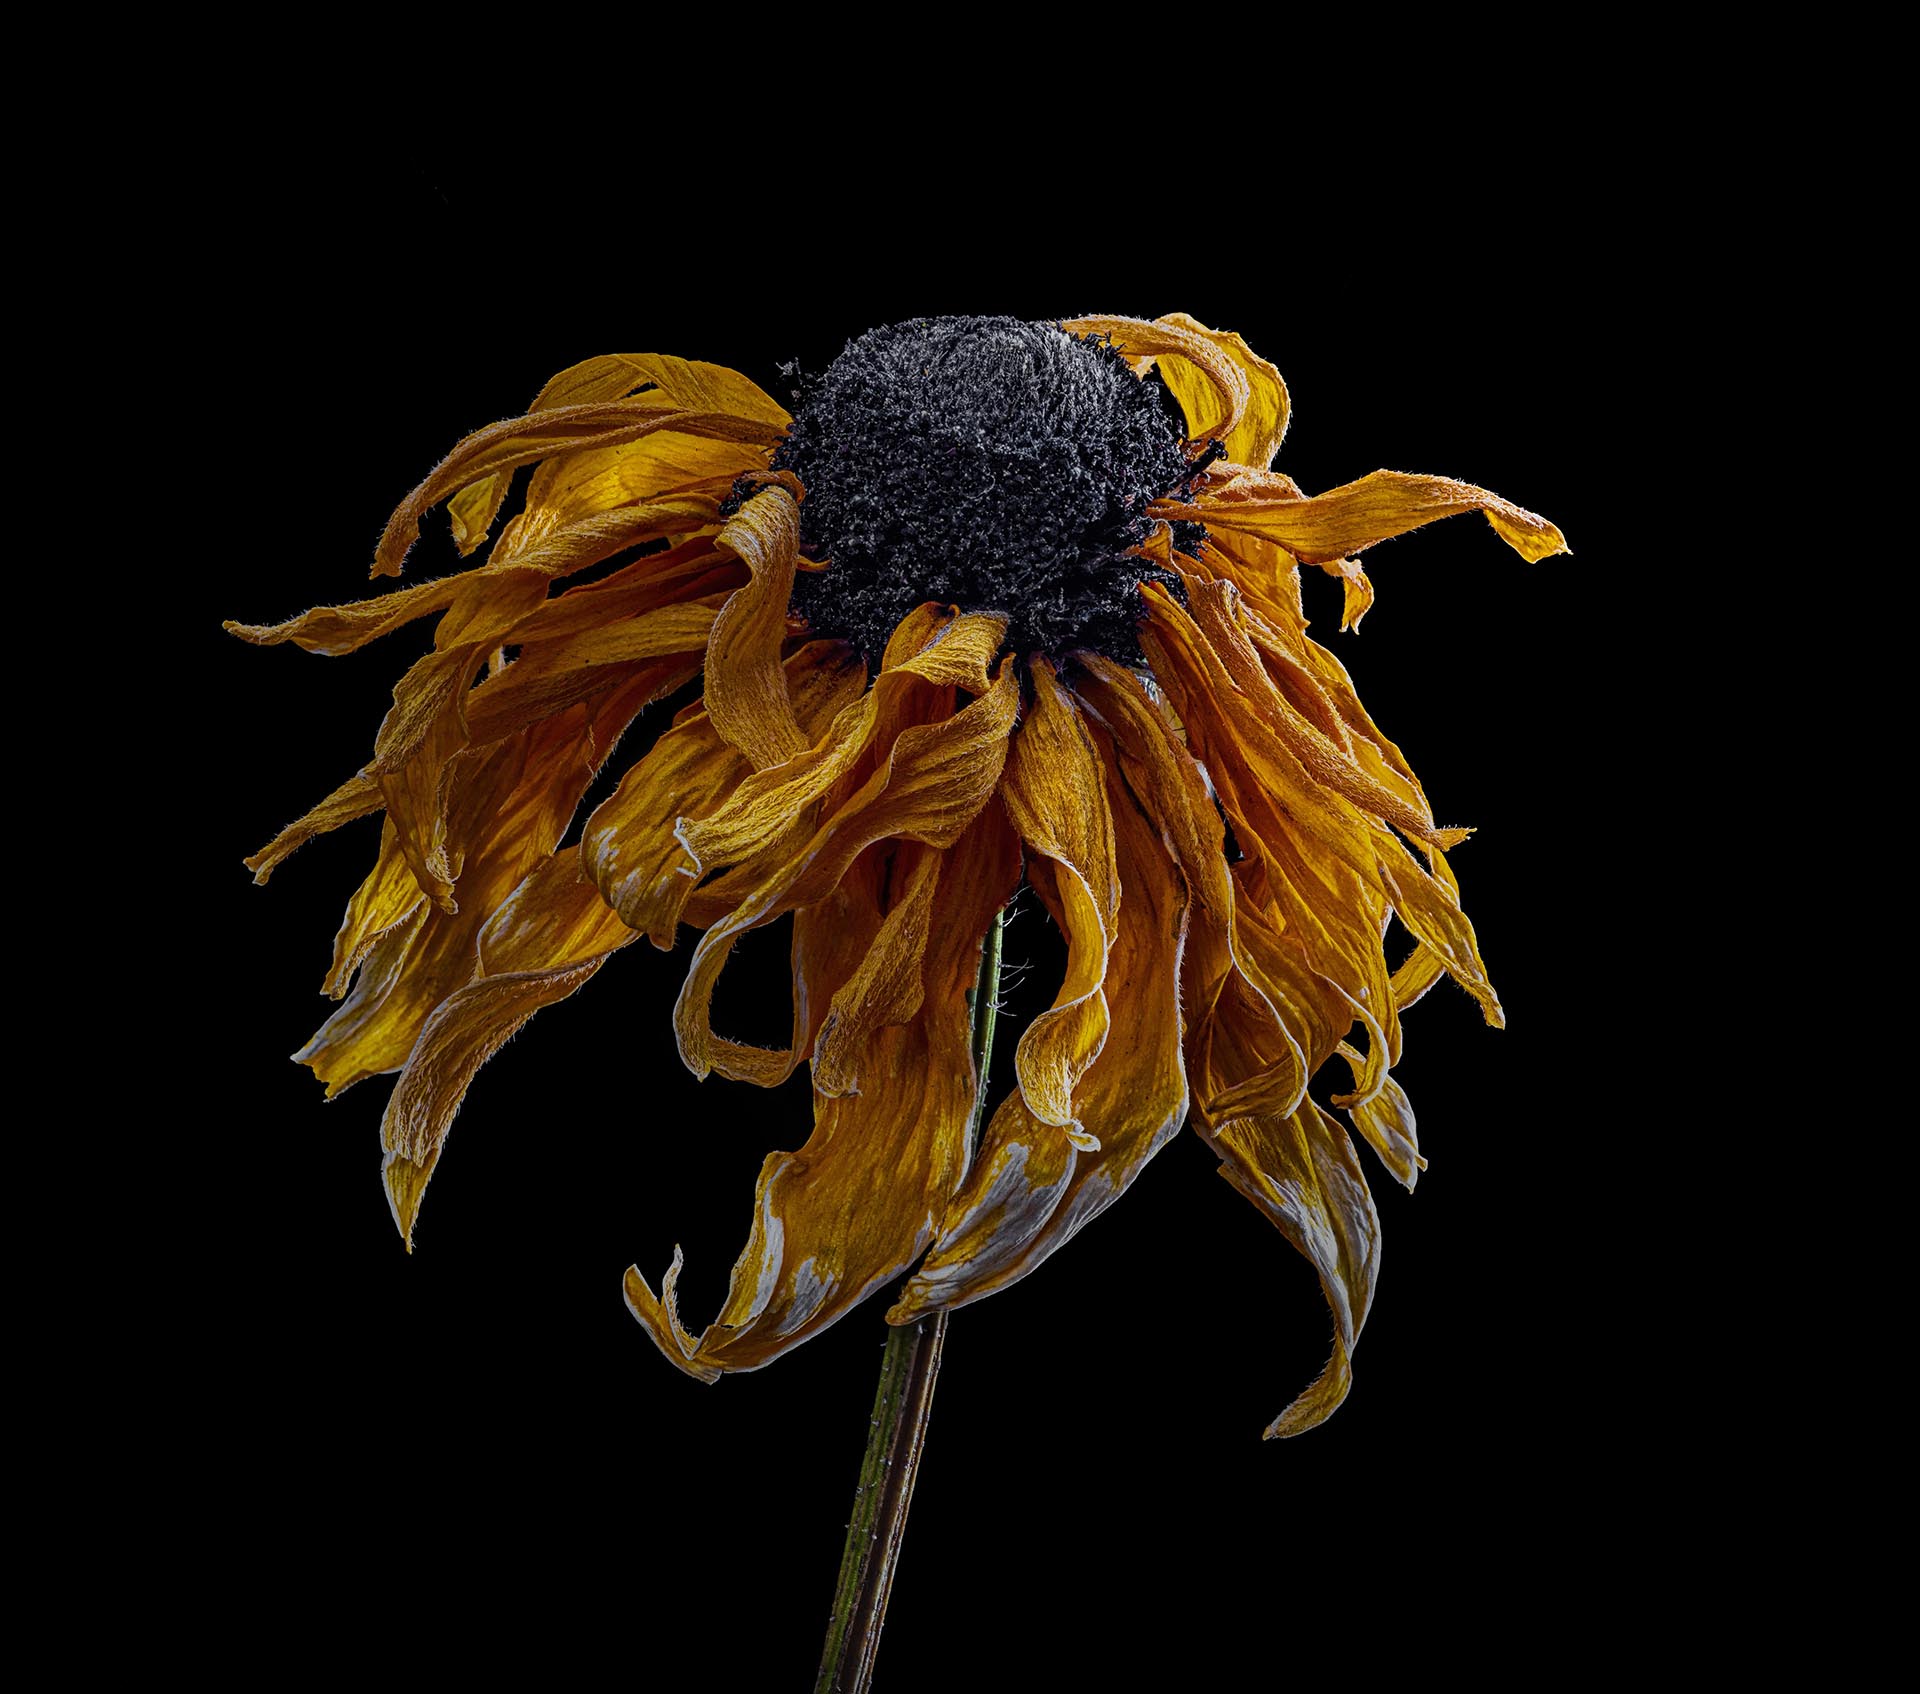 Dried Sunflower by Charles Ginsburgh